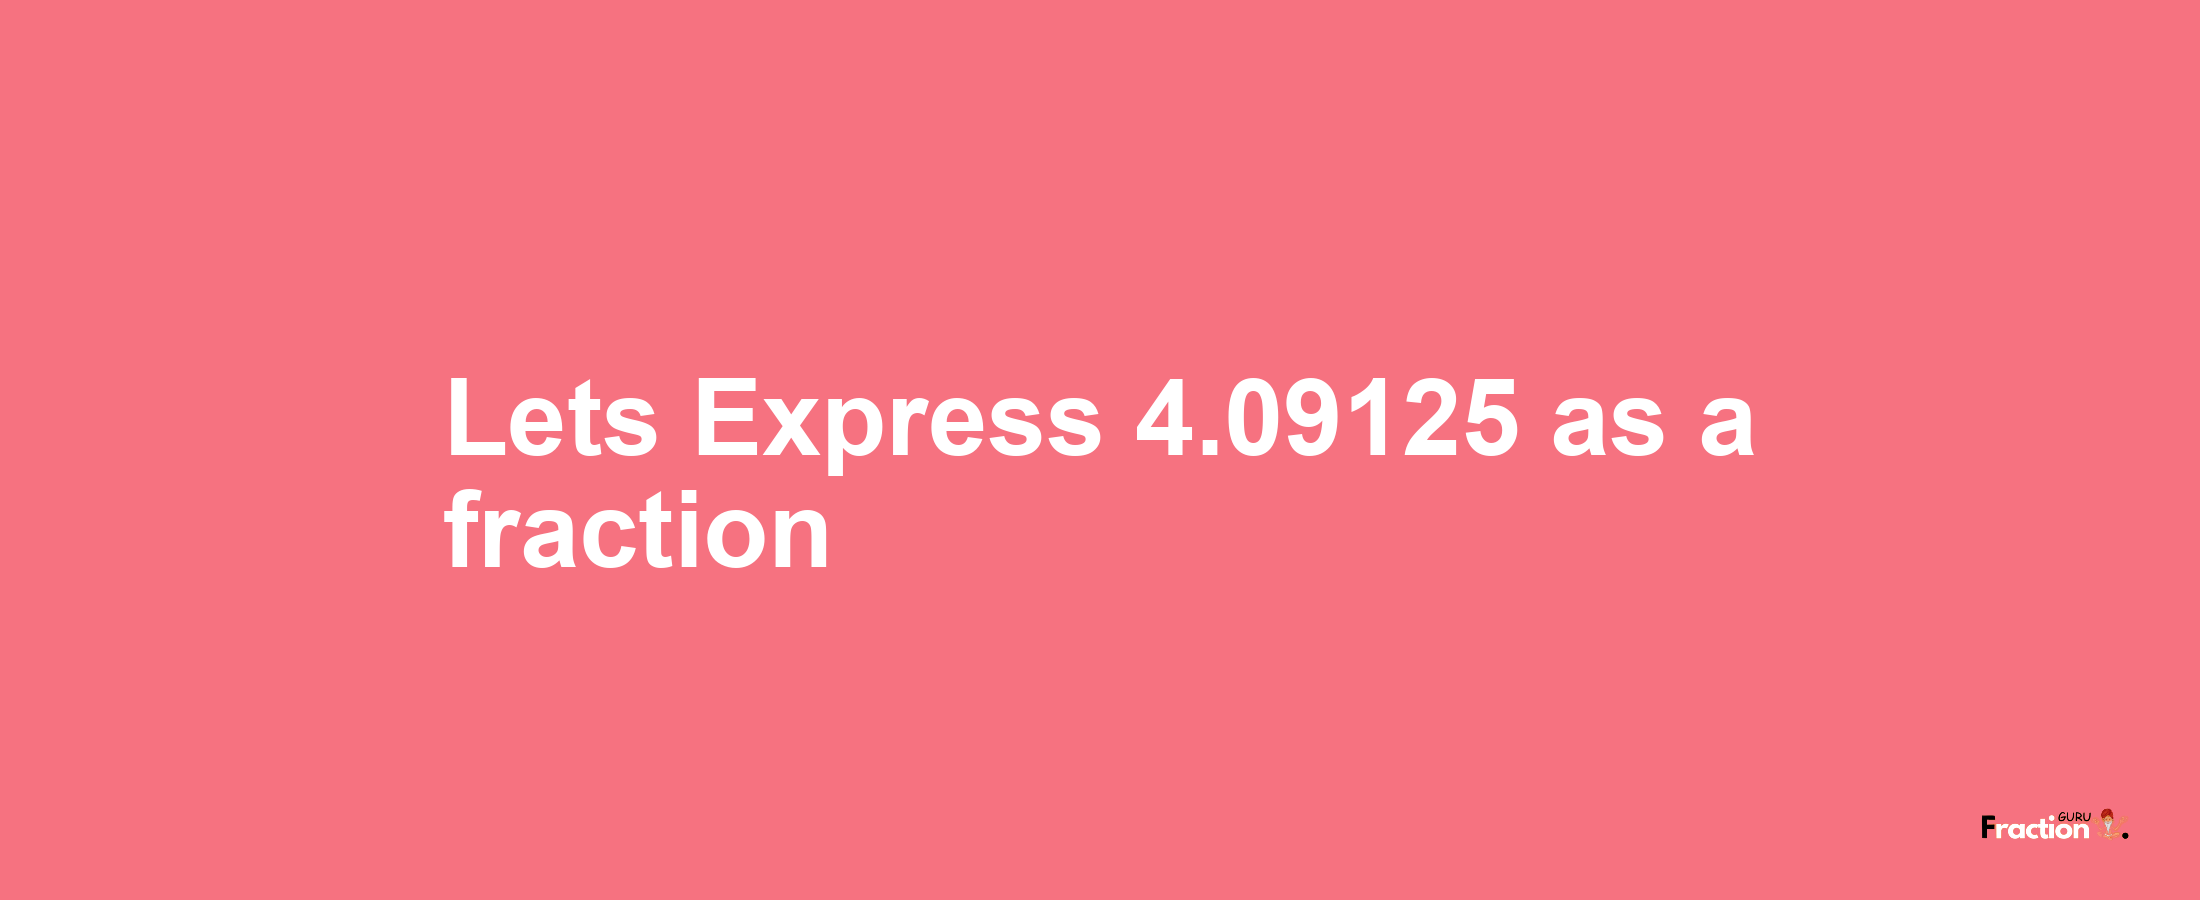 Lets Express 4.09125 as afraction